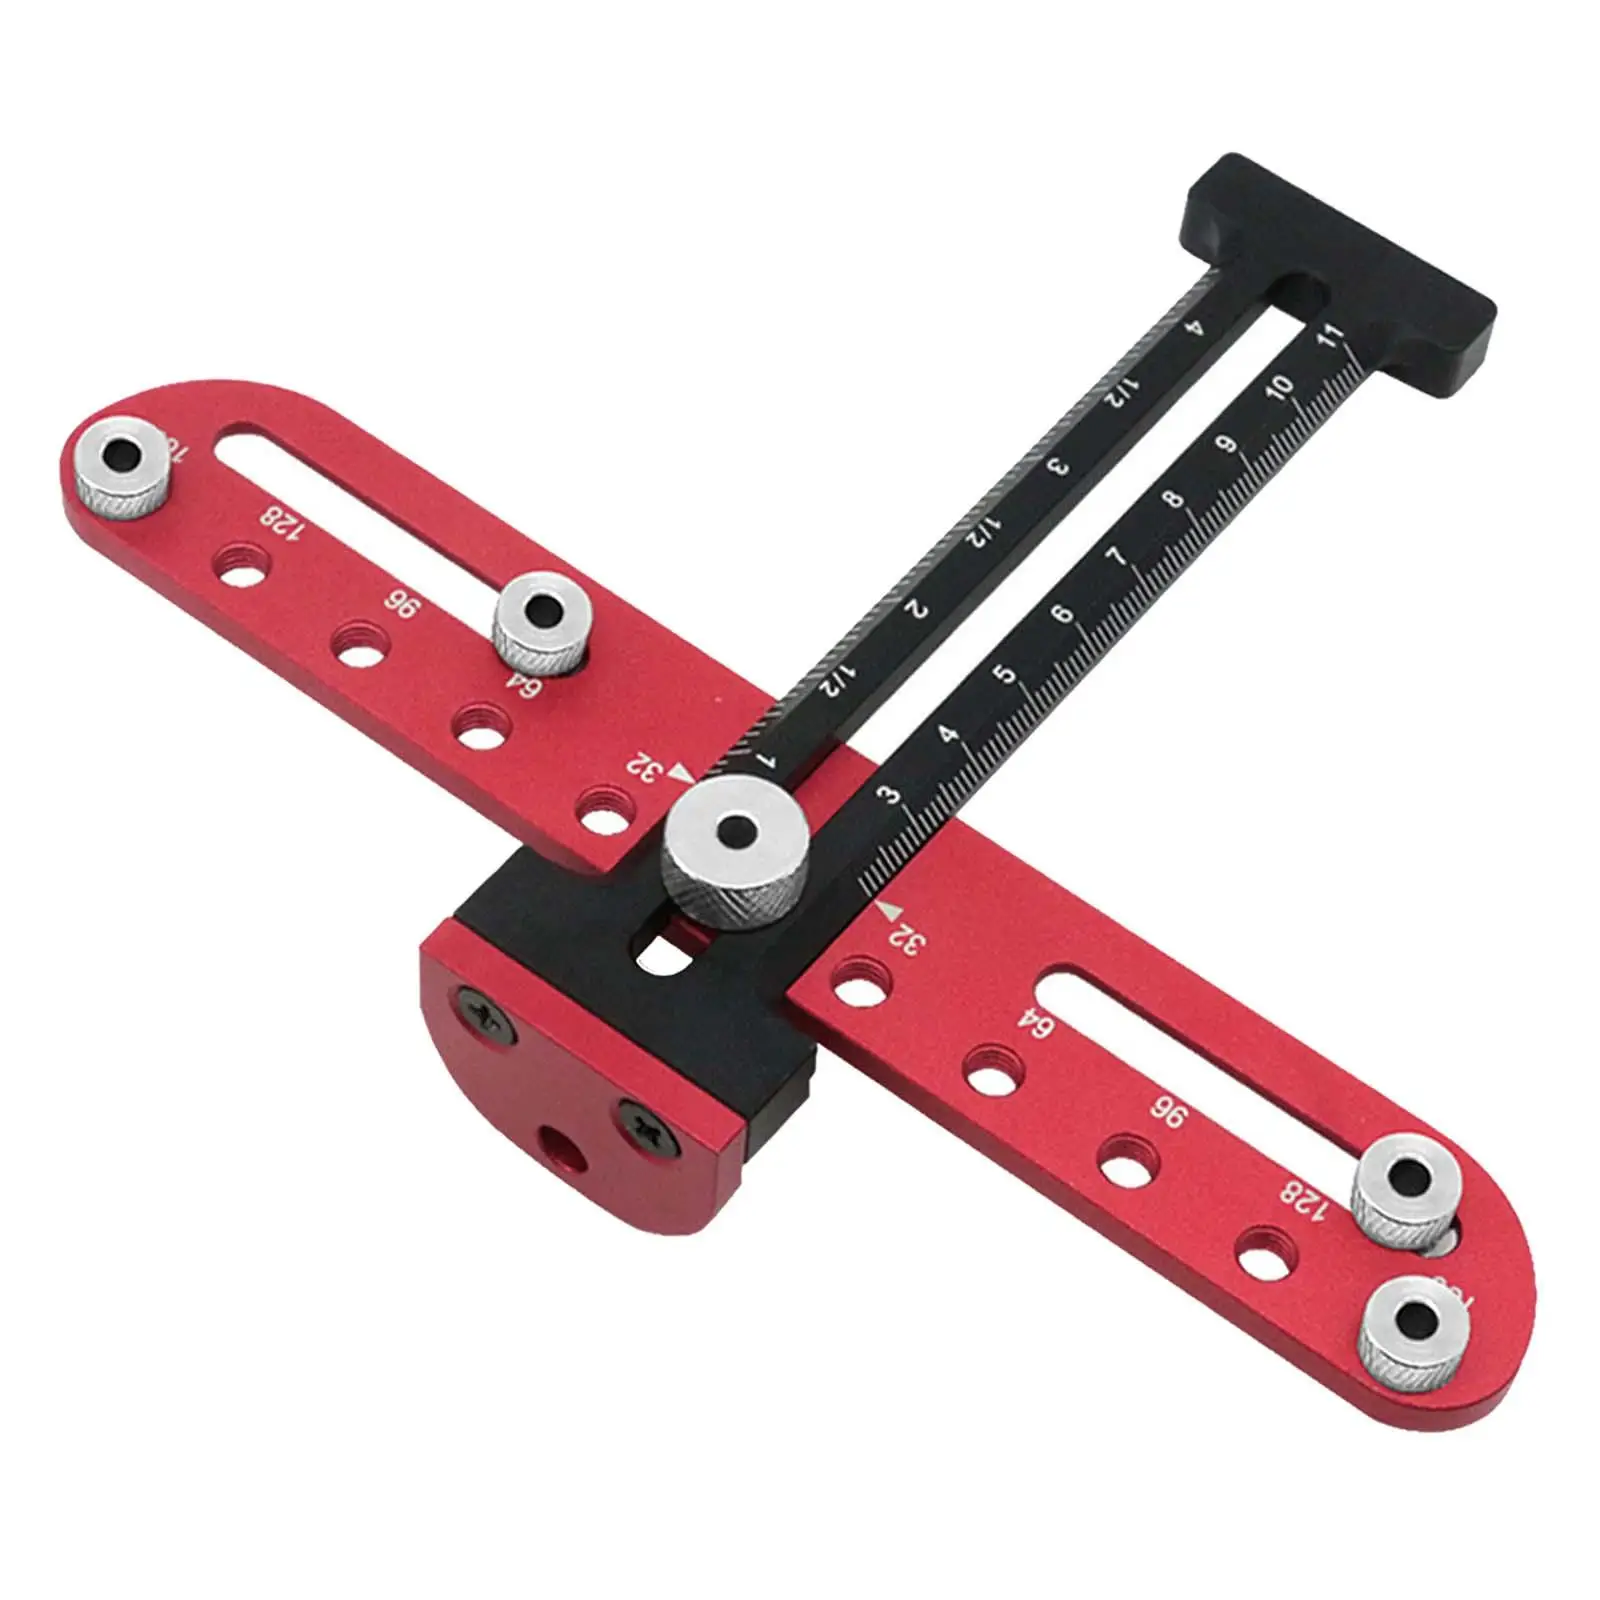 Wood Dowelling Guide, Punch , Cabinet Hardware Jig Wood Dowelling Tools Stainless Steel Hole Handle Punch ,